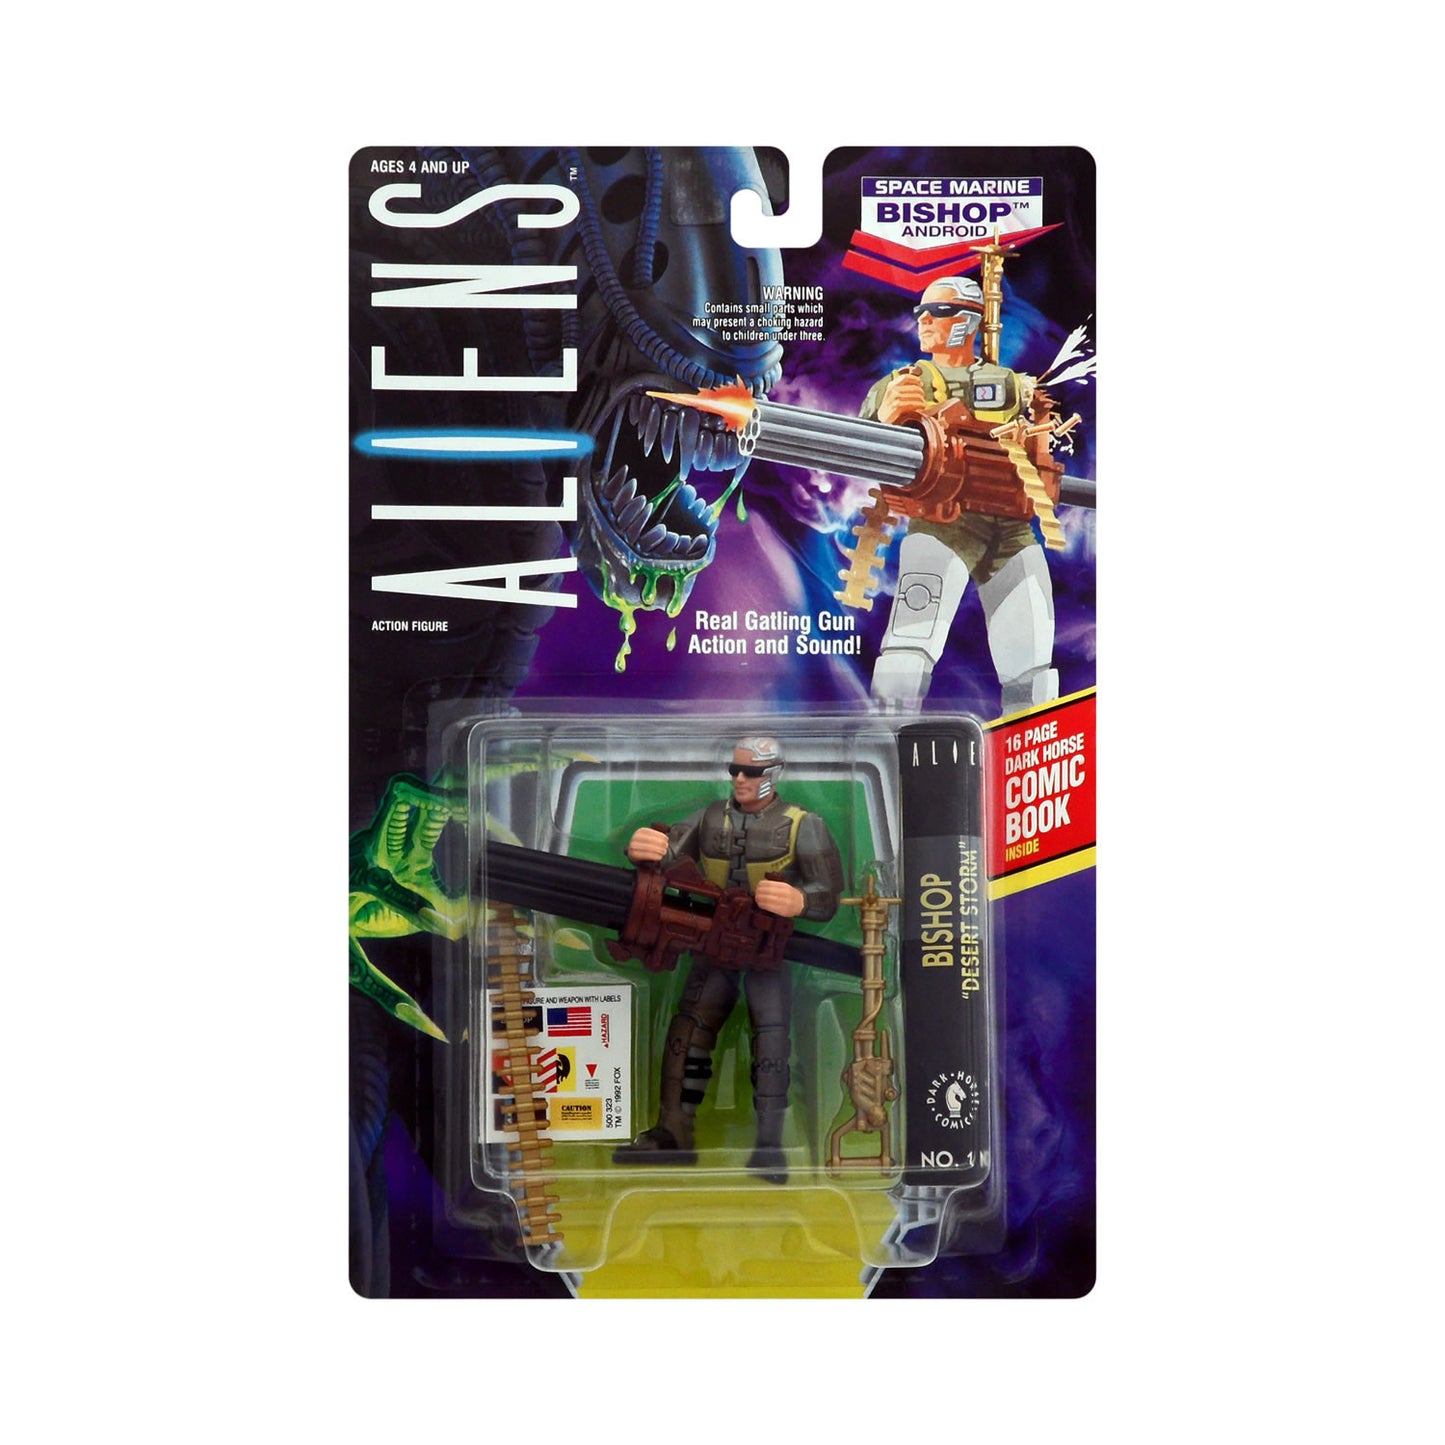 Bishop Android Action Figure from Aliens